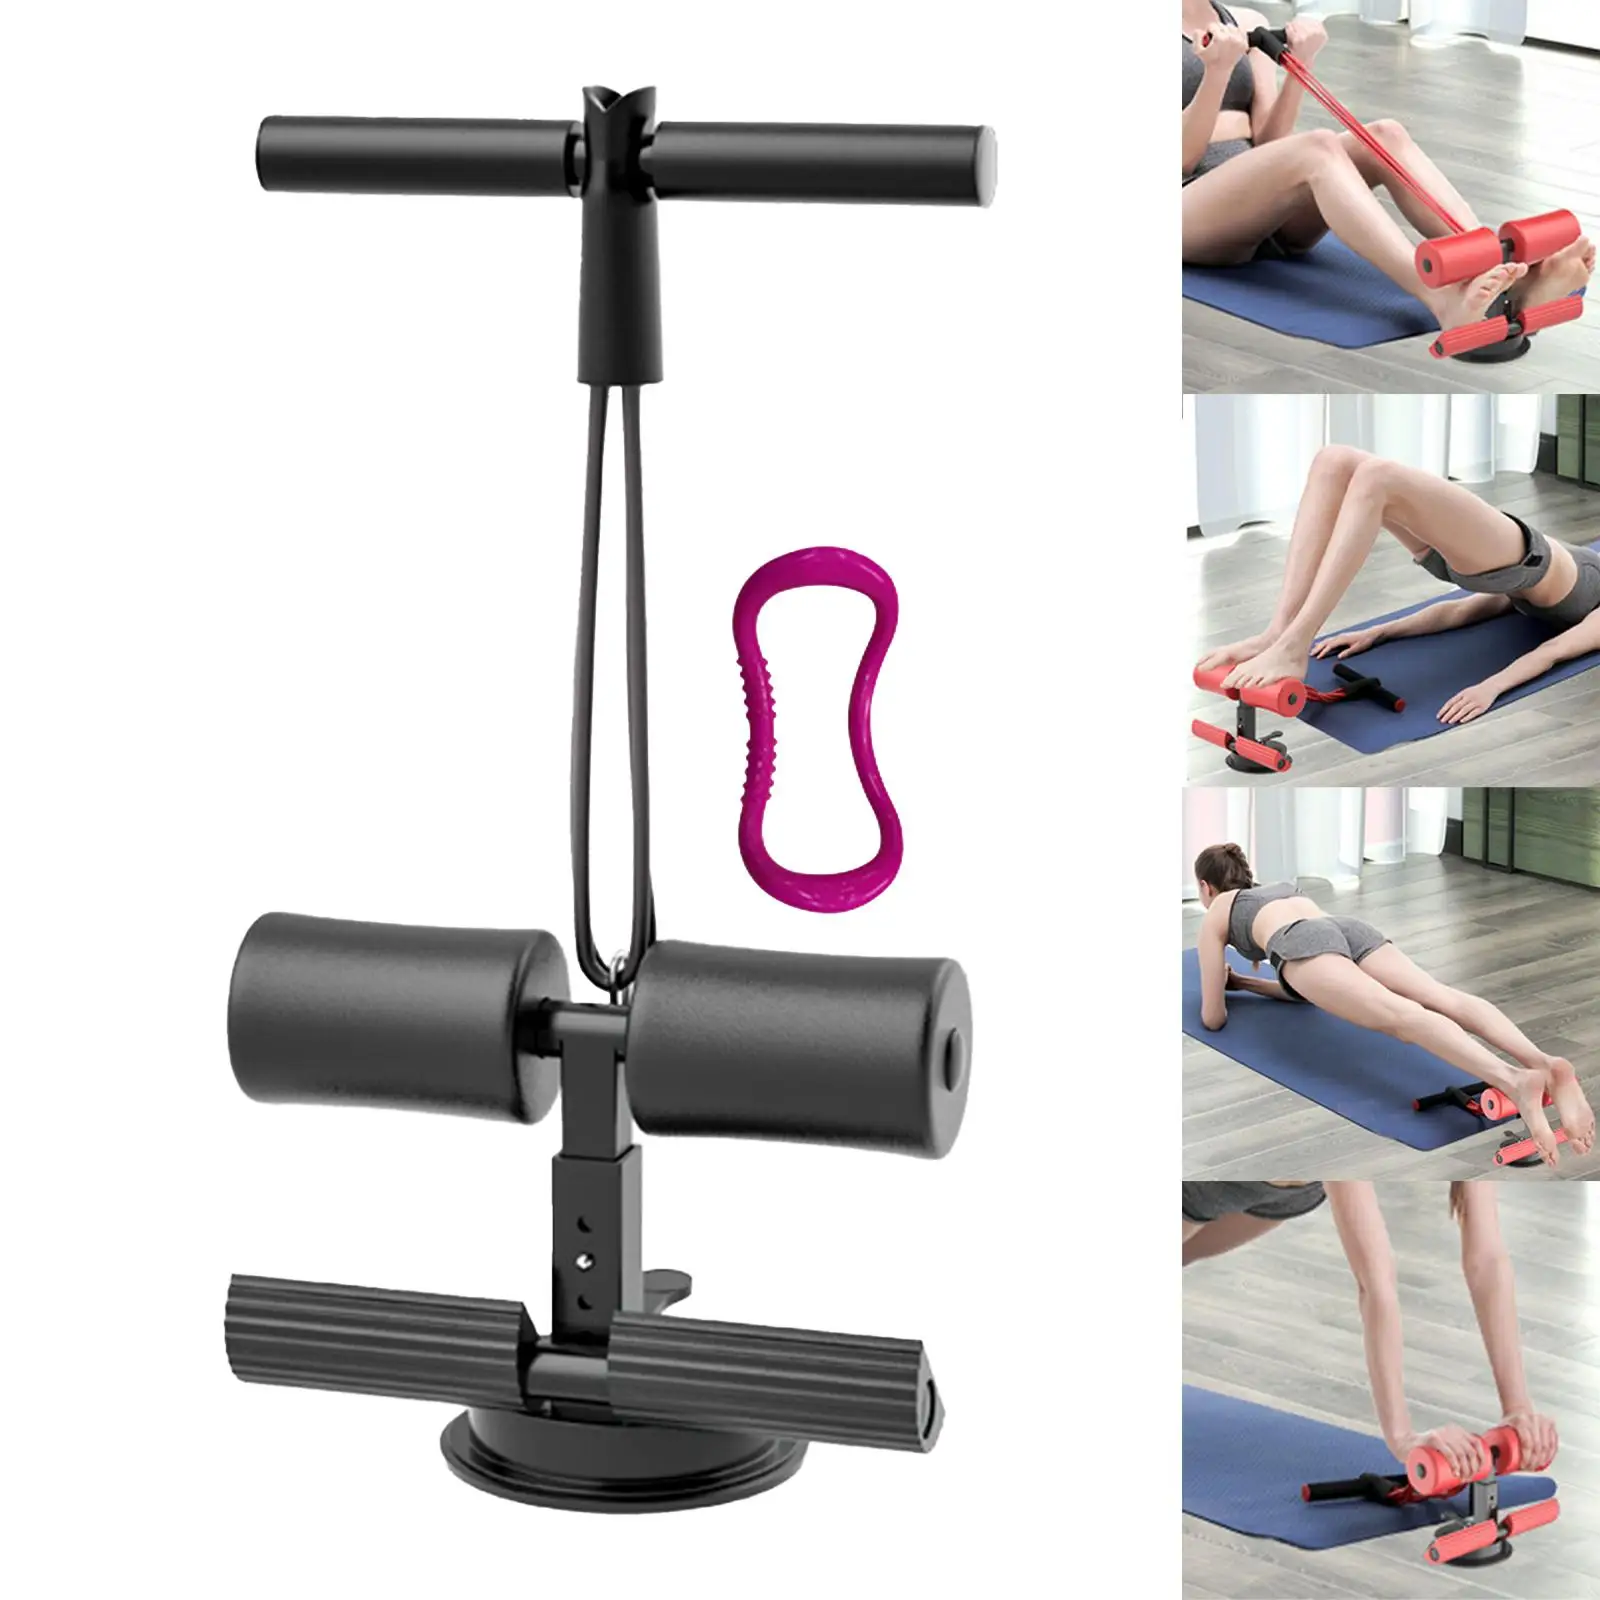 Ankle Support Fittings Machine Abdominal Portable Adjustable Equipment Device Bar Sit up Rack for Gym Sports Workout Travel Home